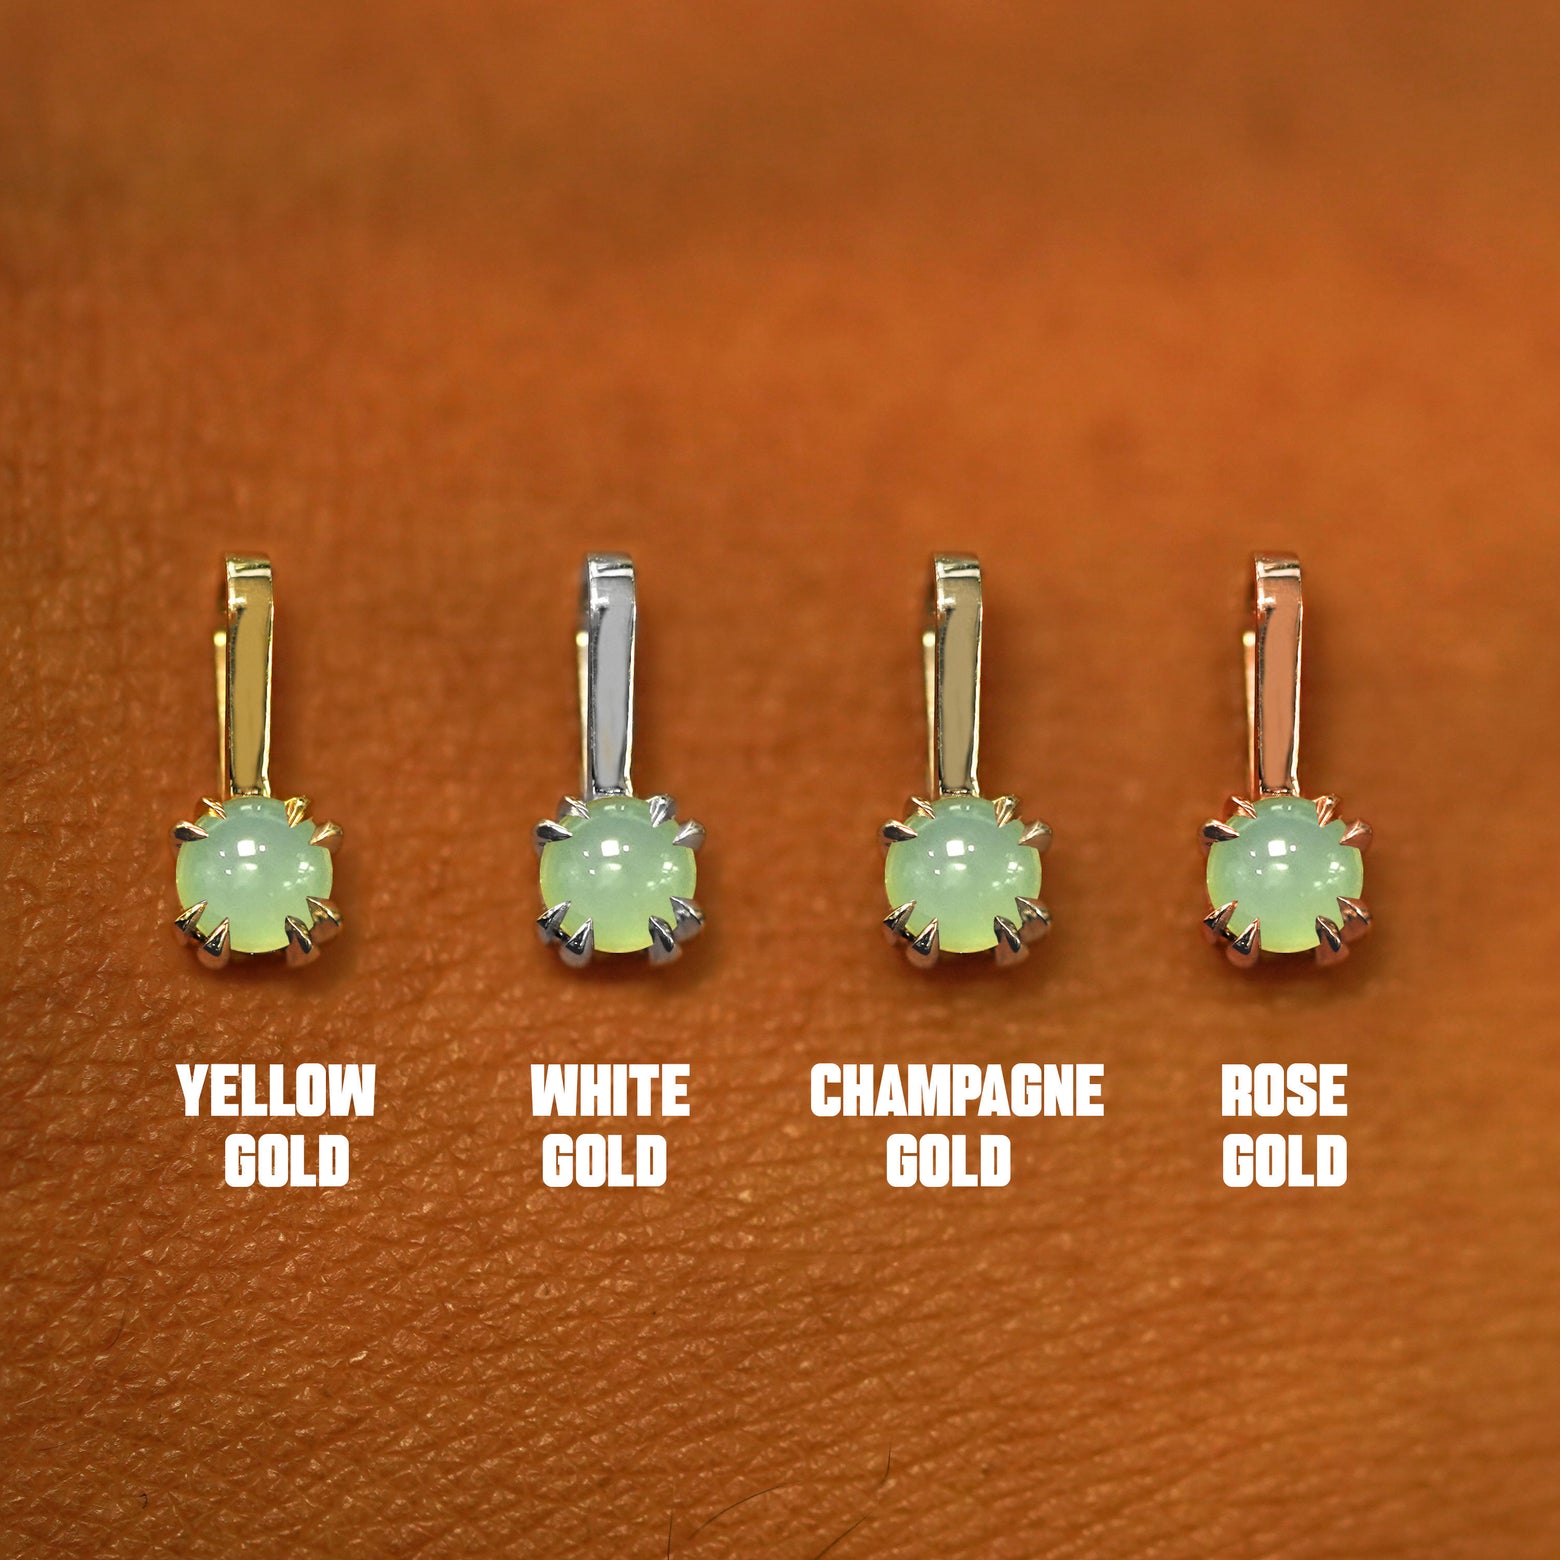 Four versions of the Jade Charm shown in options of yellow, white, rose, and champagne gold